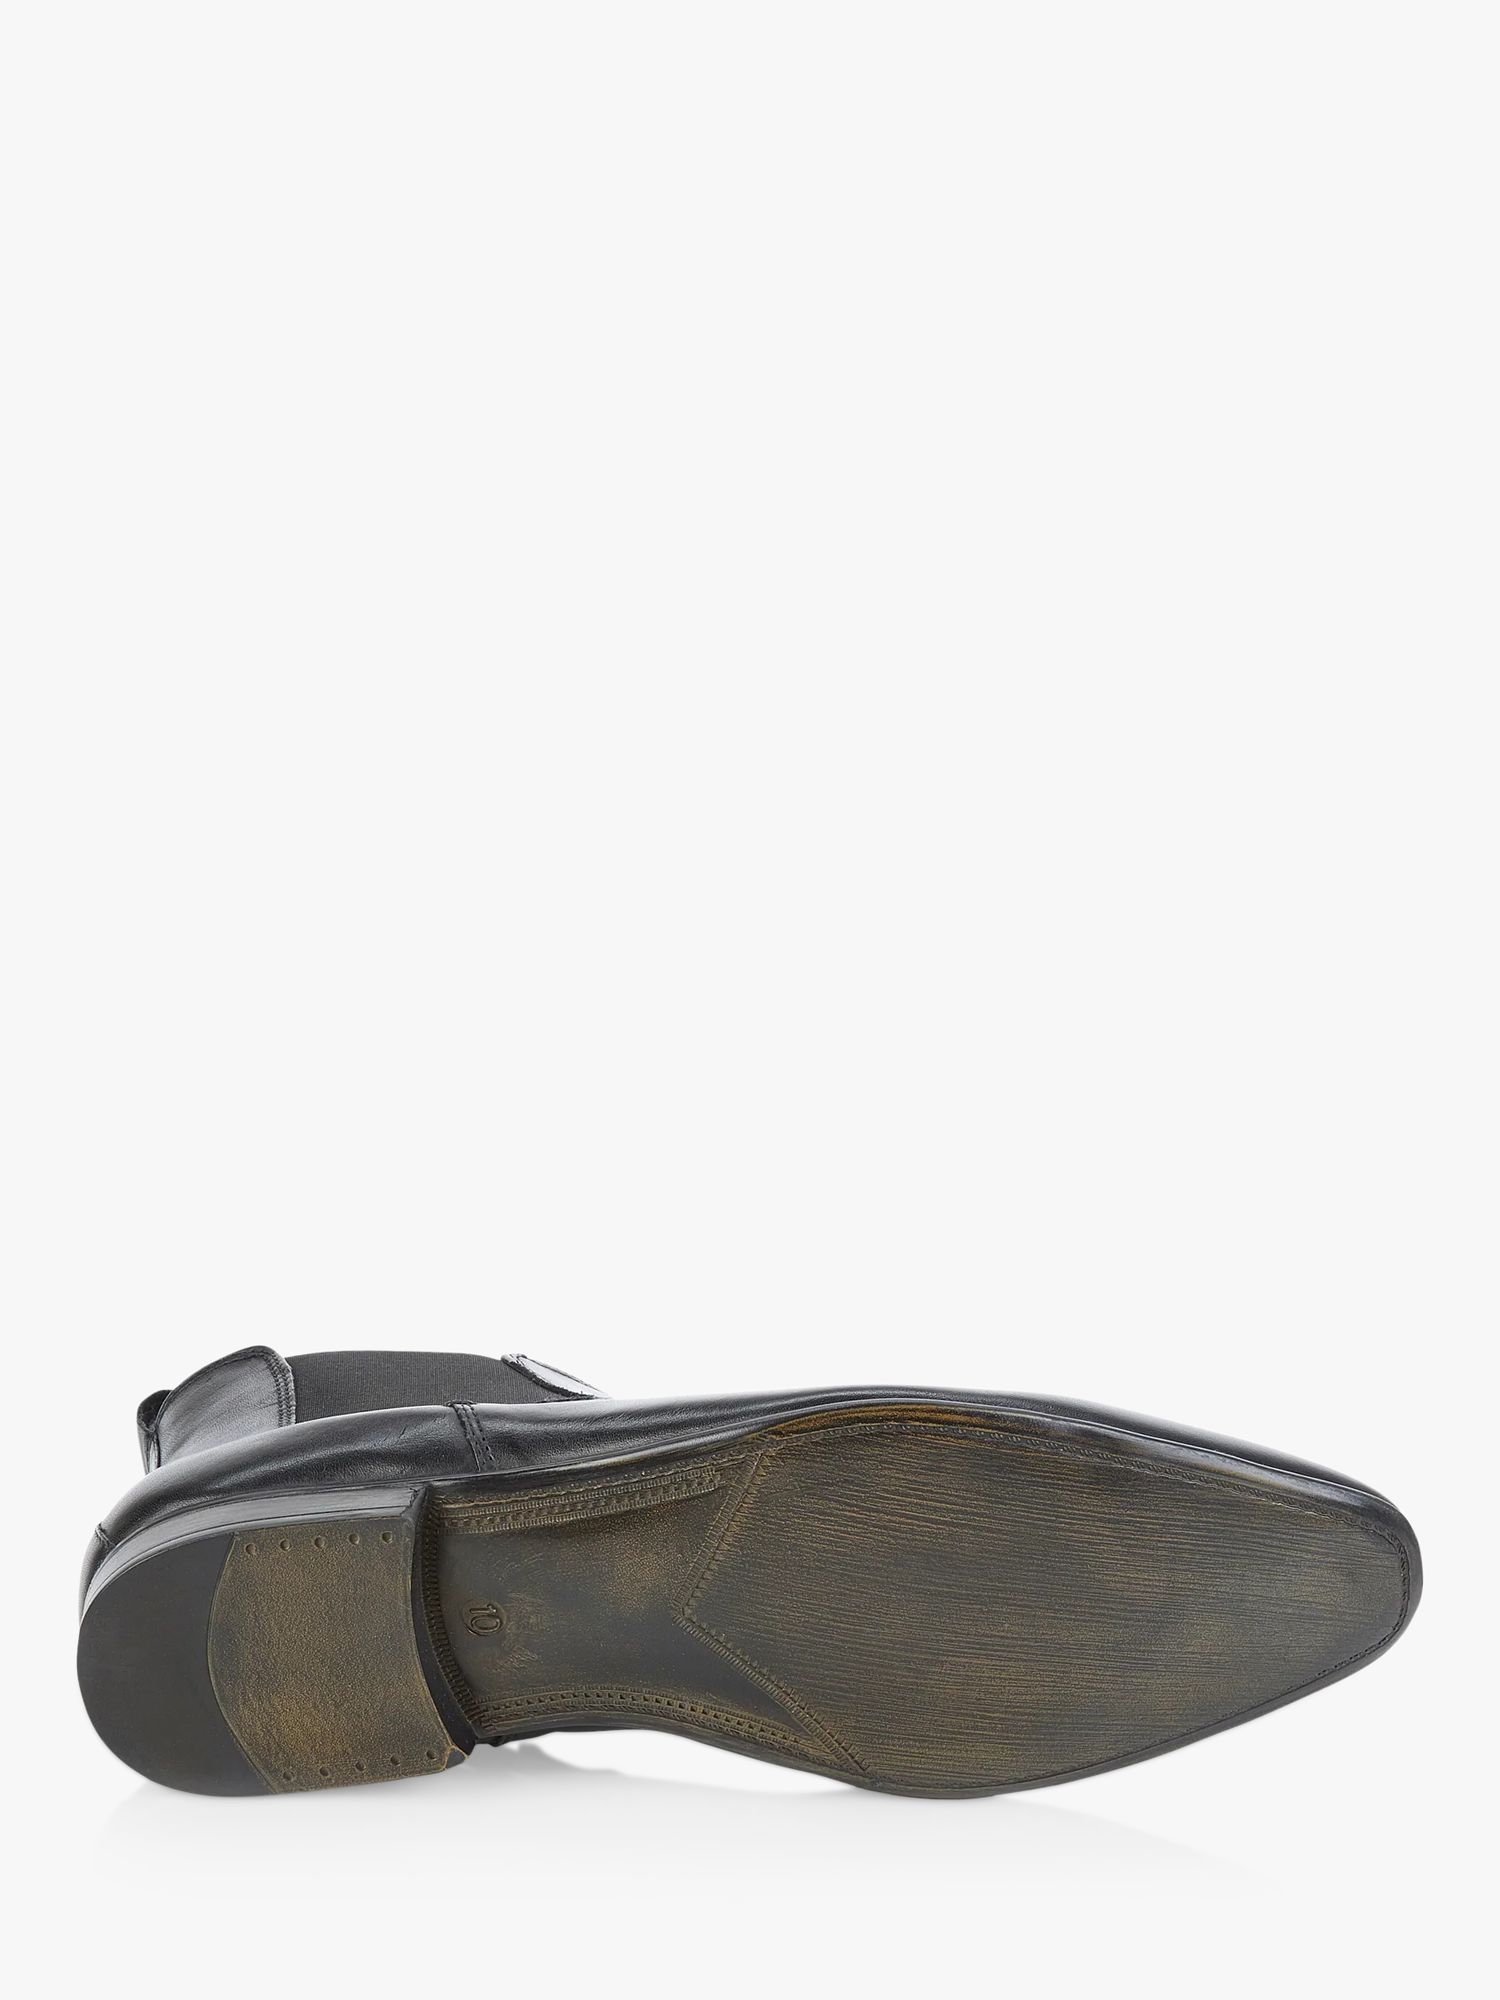 Buy Silver Street London Carnaby Leather Chelsea Boots Online at johnlewis.com